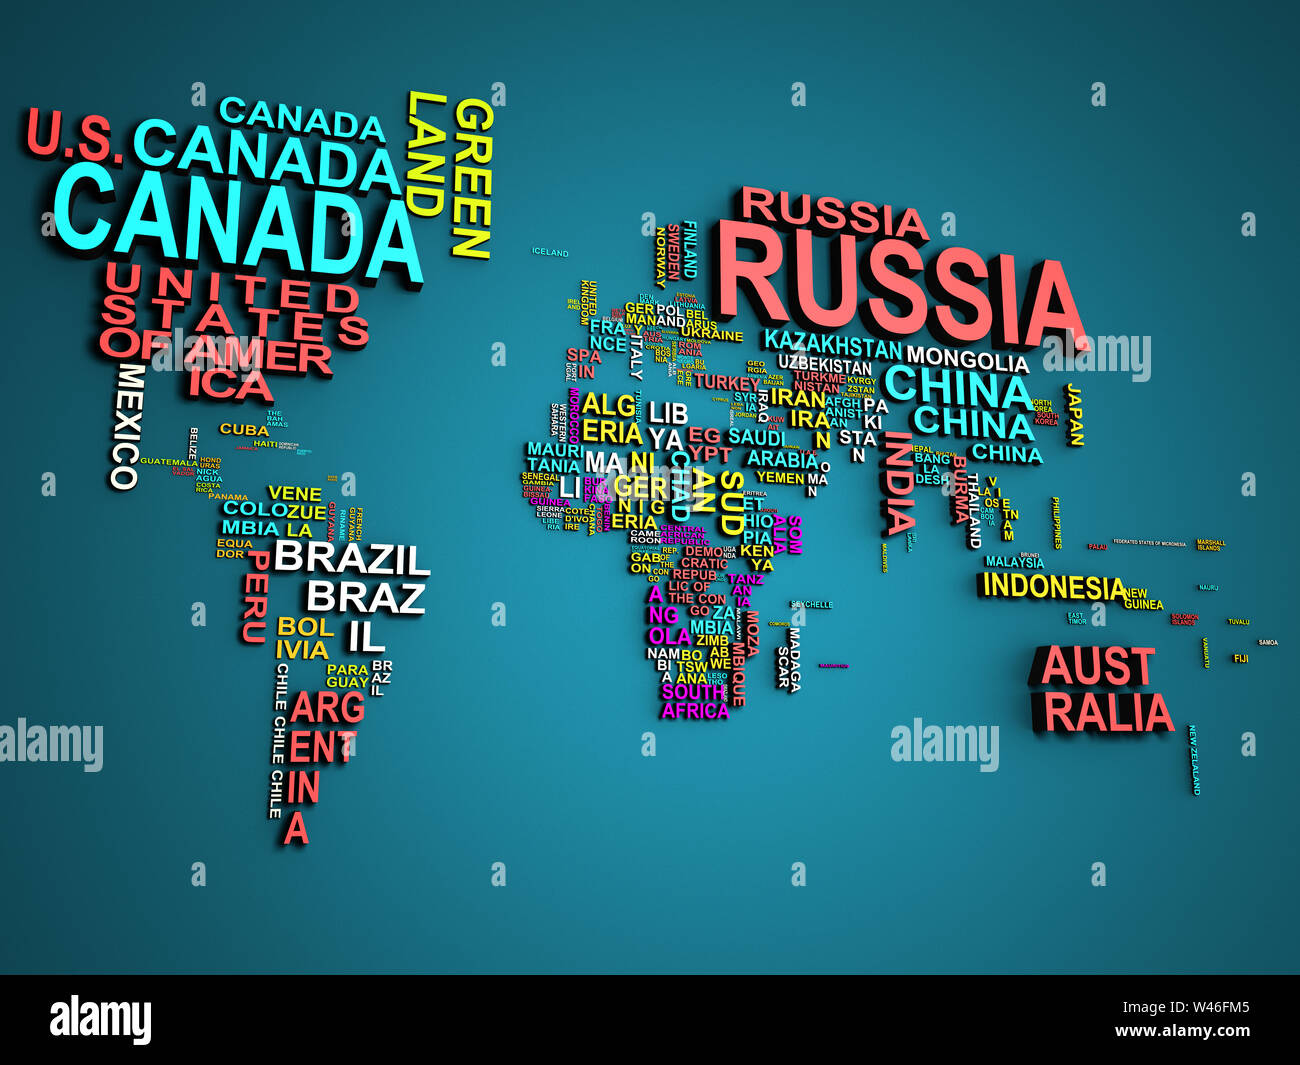 World Map With State Names The world map with all states and their names 3d illustration on 